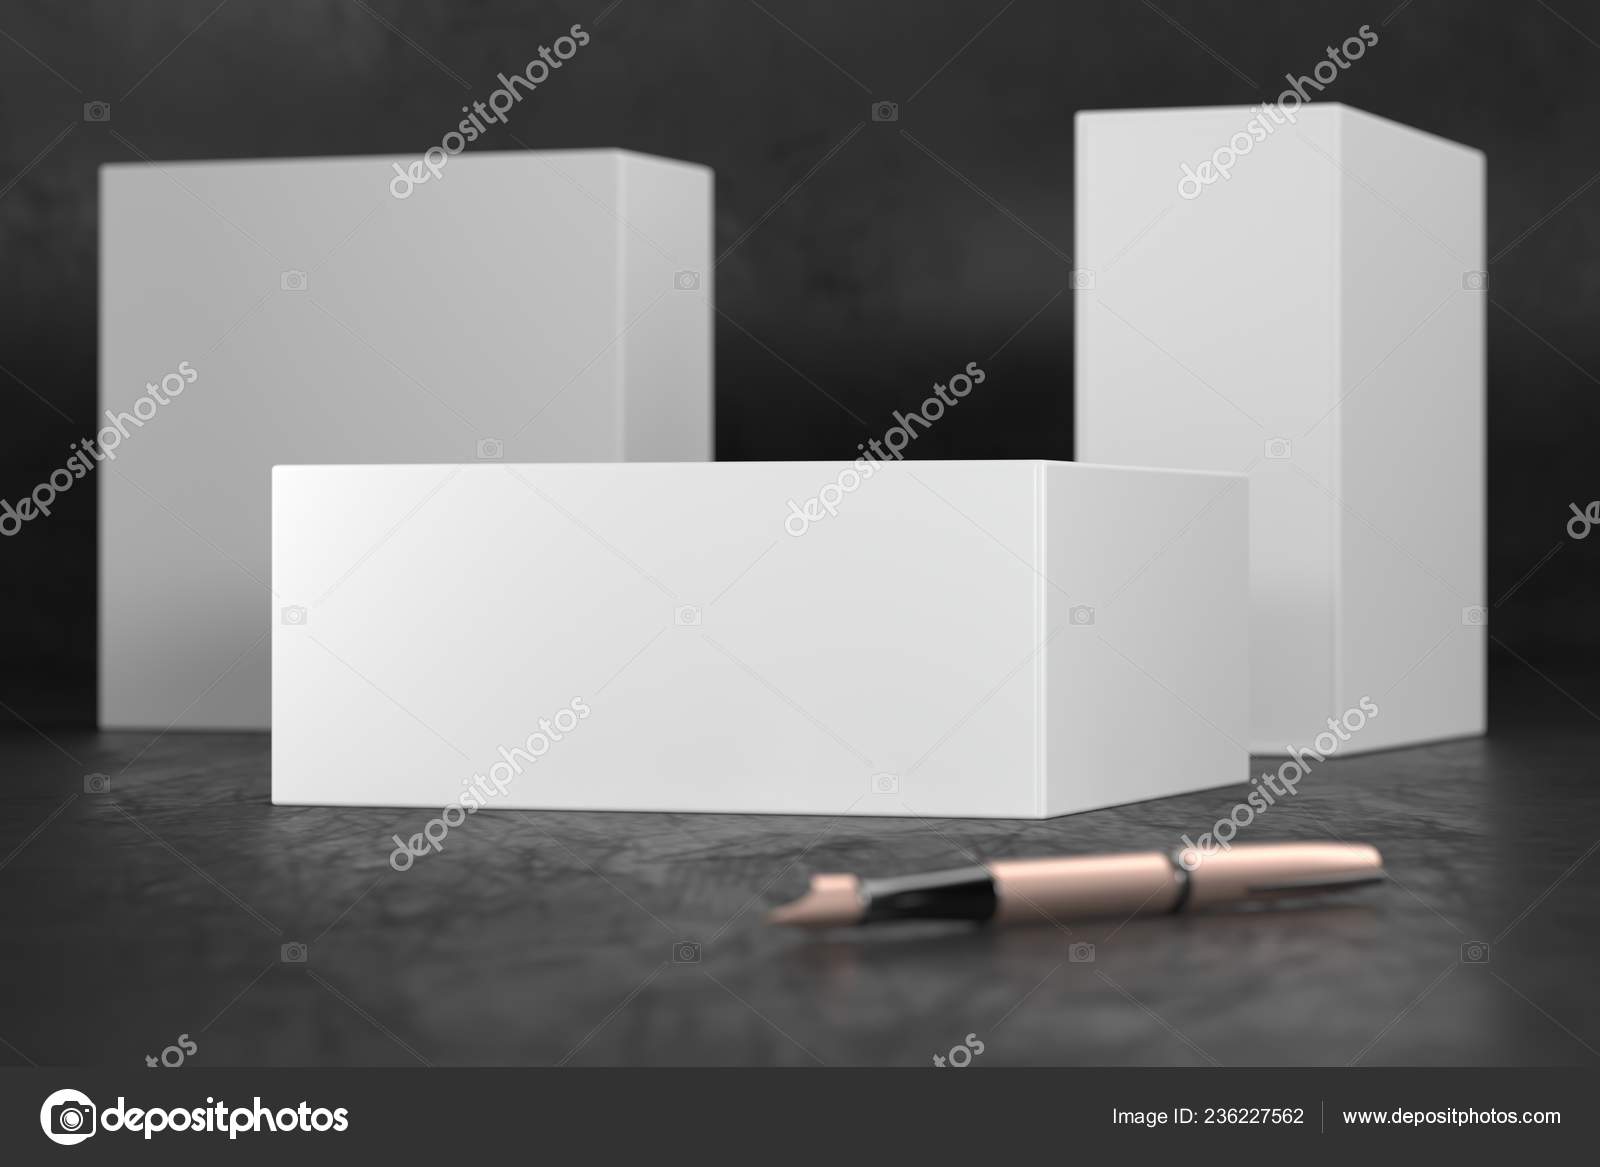 Download Whitegift Box Packaging Mockup On Black Background Luxury Packaging Boxes For Premium Products Elegant Whitebox 3d Rendering Stock Photo Image By C Volmon Tut By 236227562